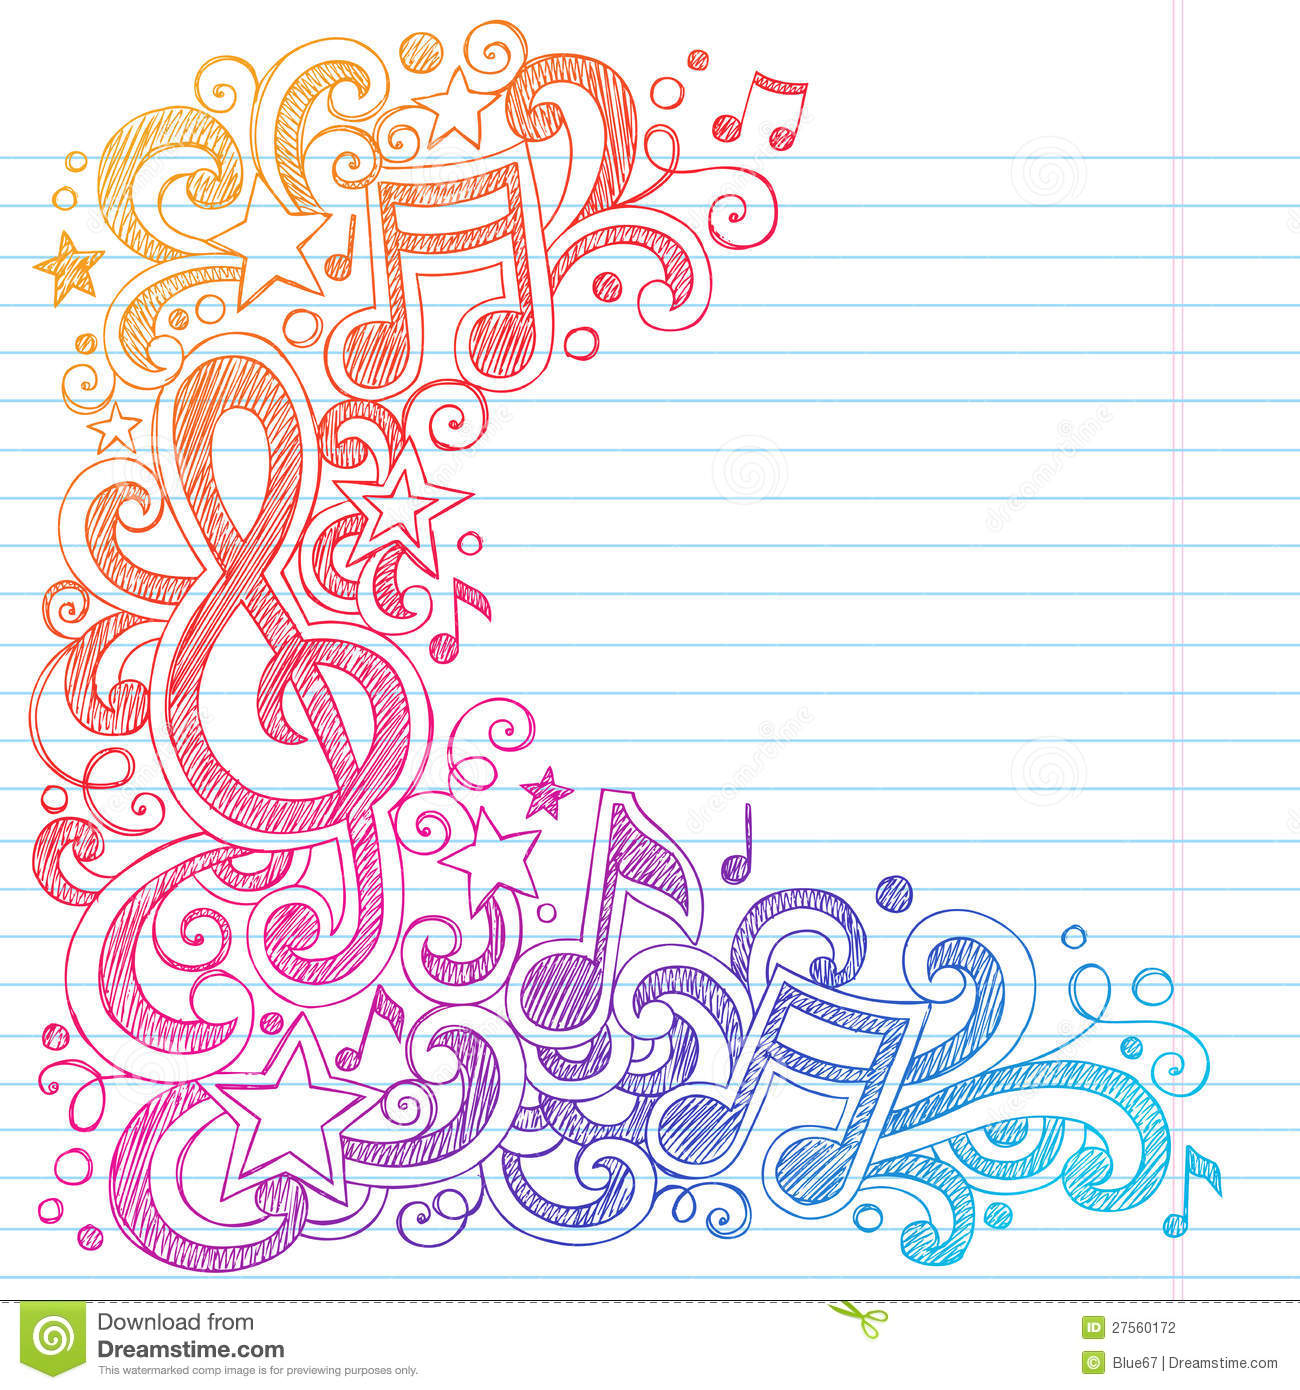 Free download Source URL httploadpapercommusicalmusical notes photo